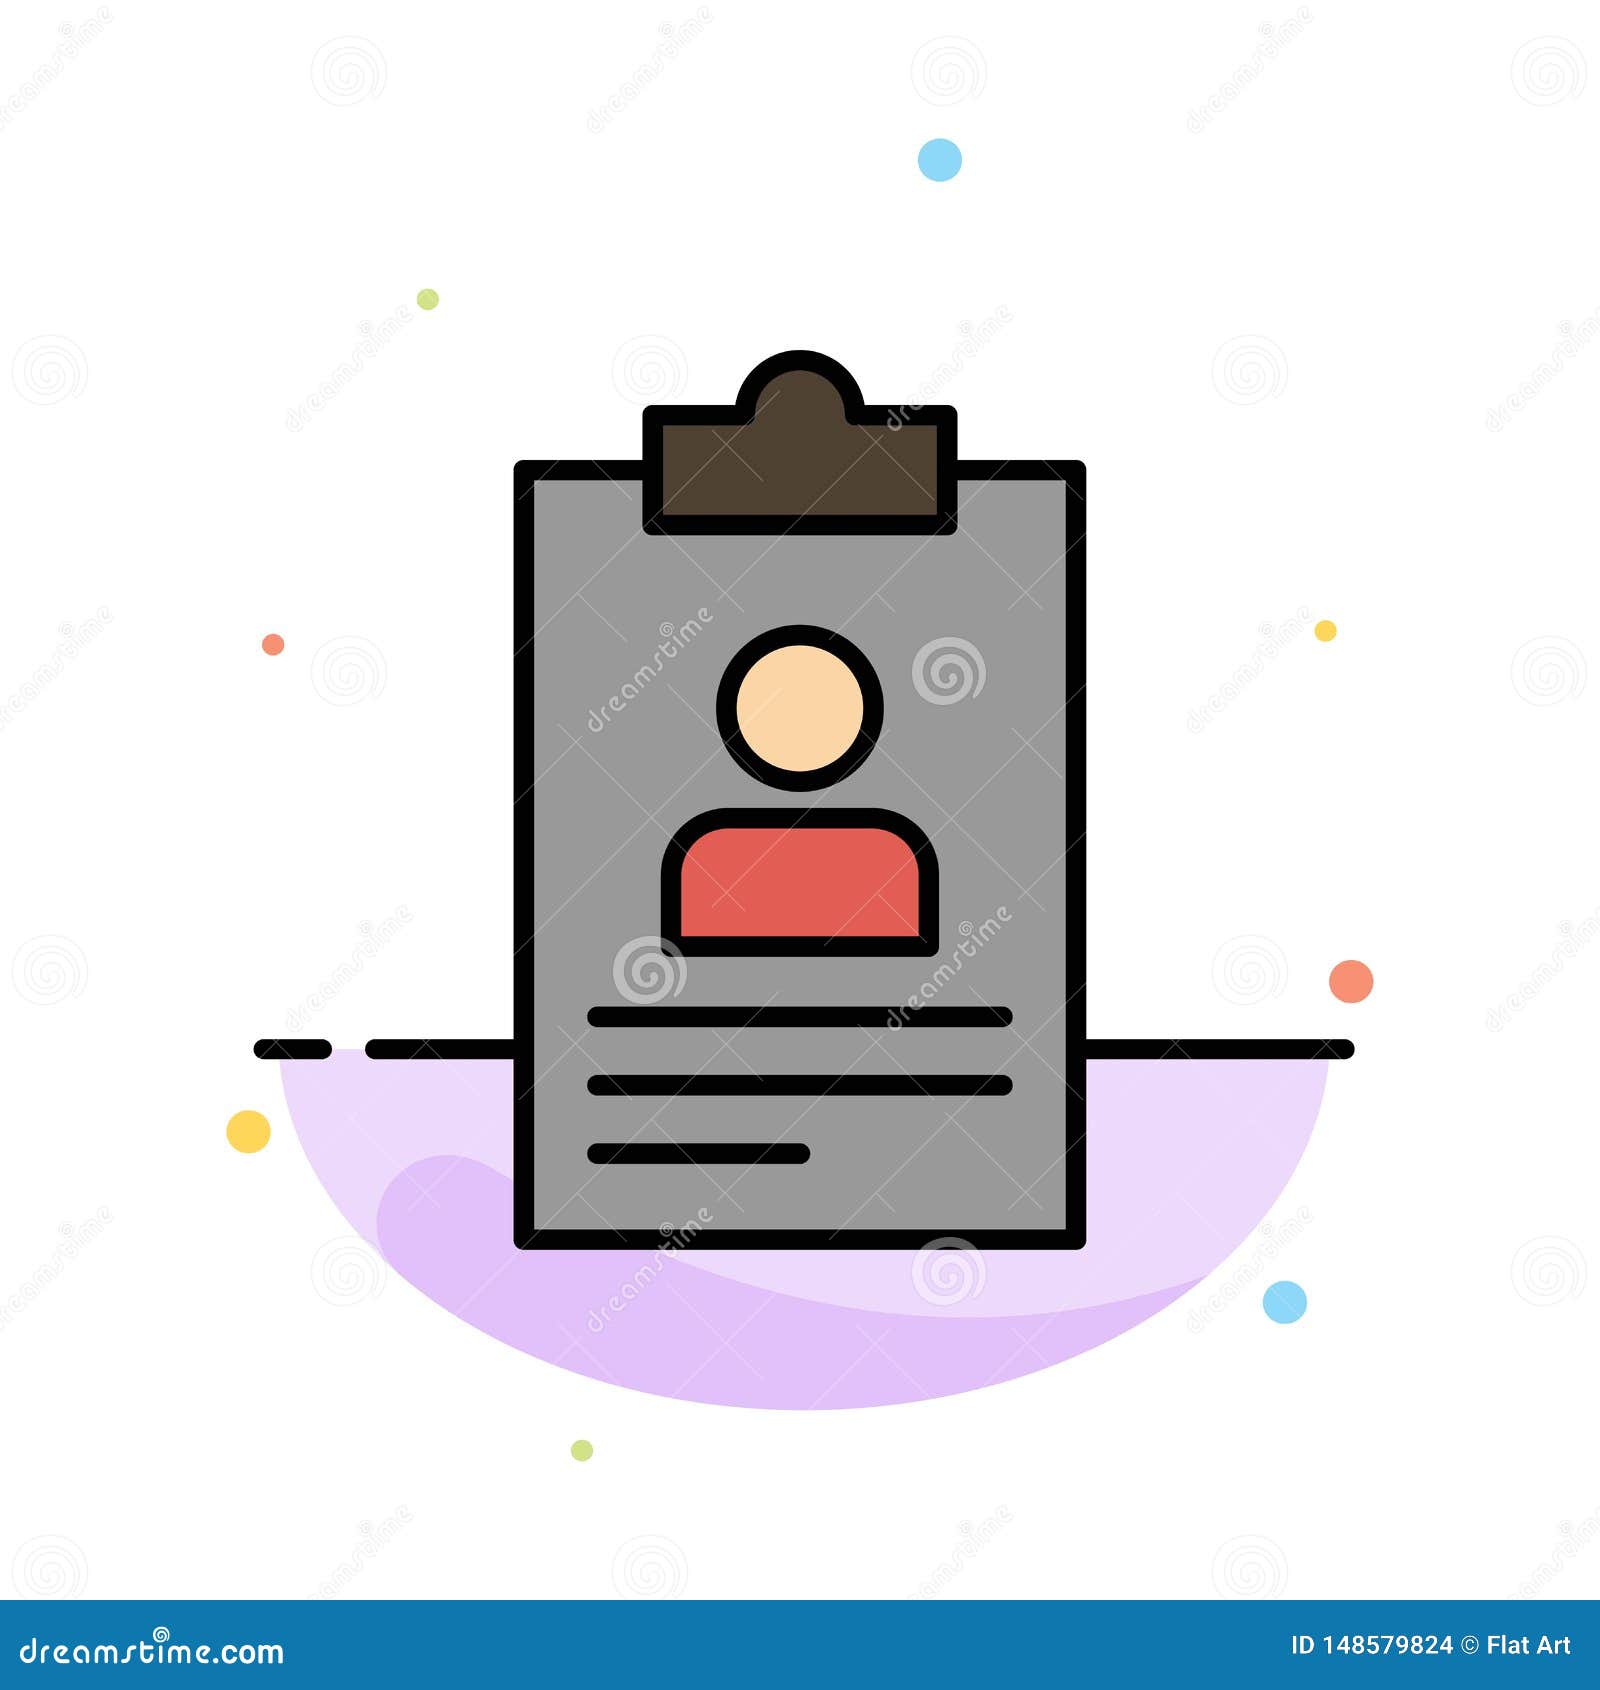 resume, application, clipboard, curriculum, cv abstract flat color icon template